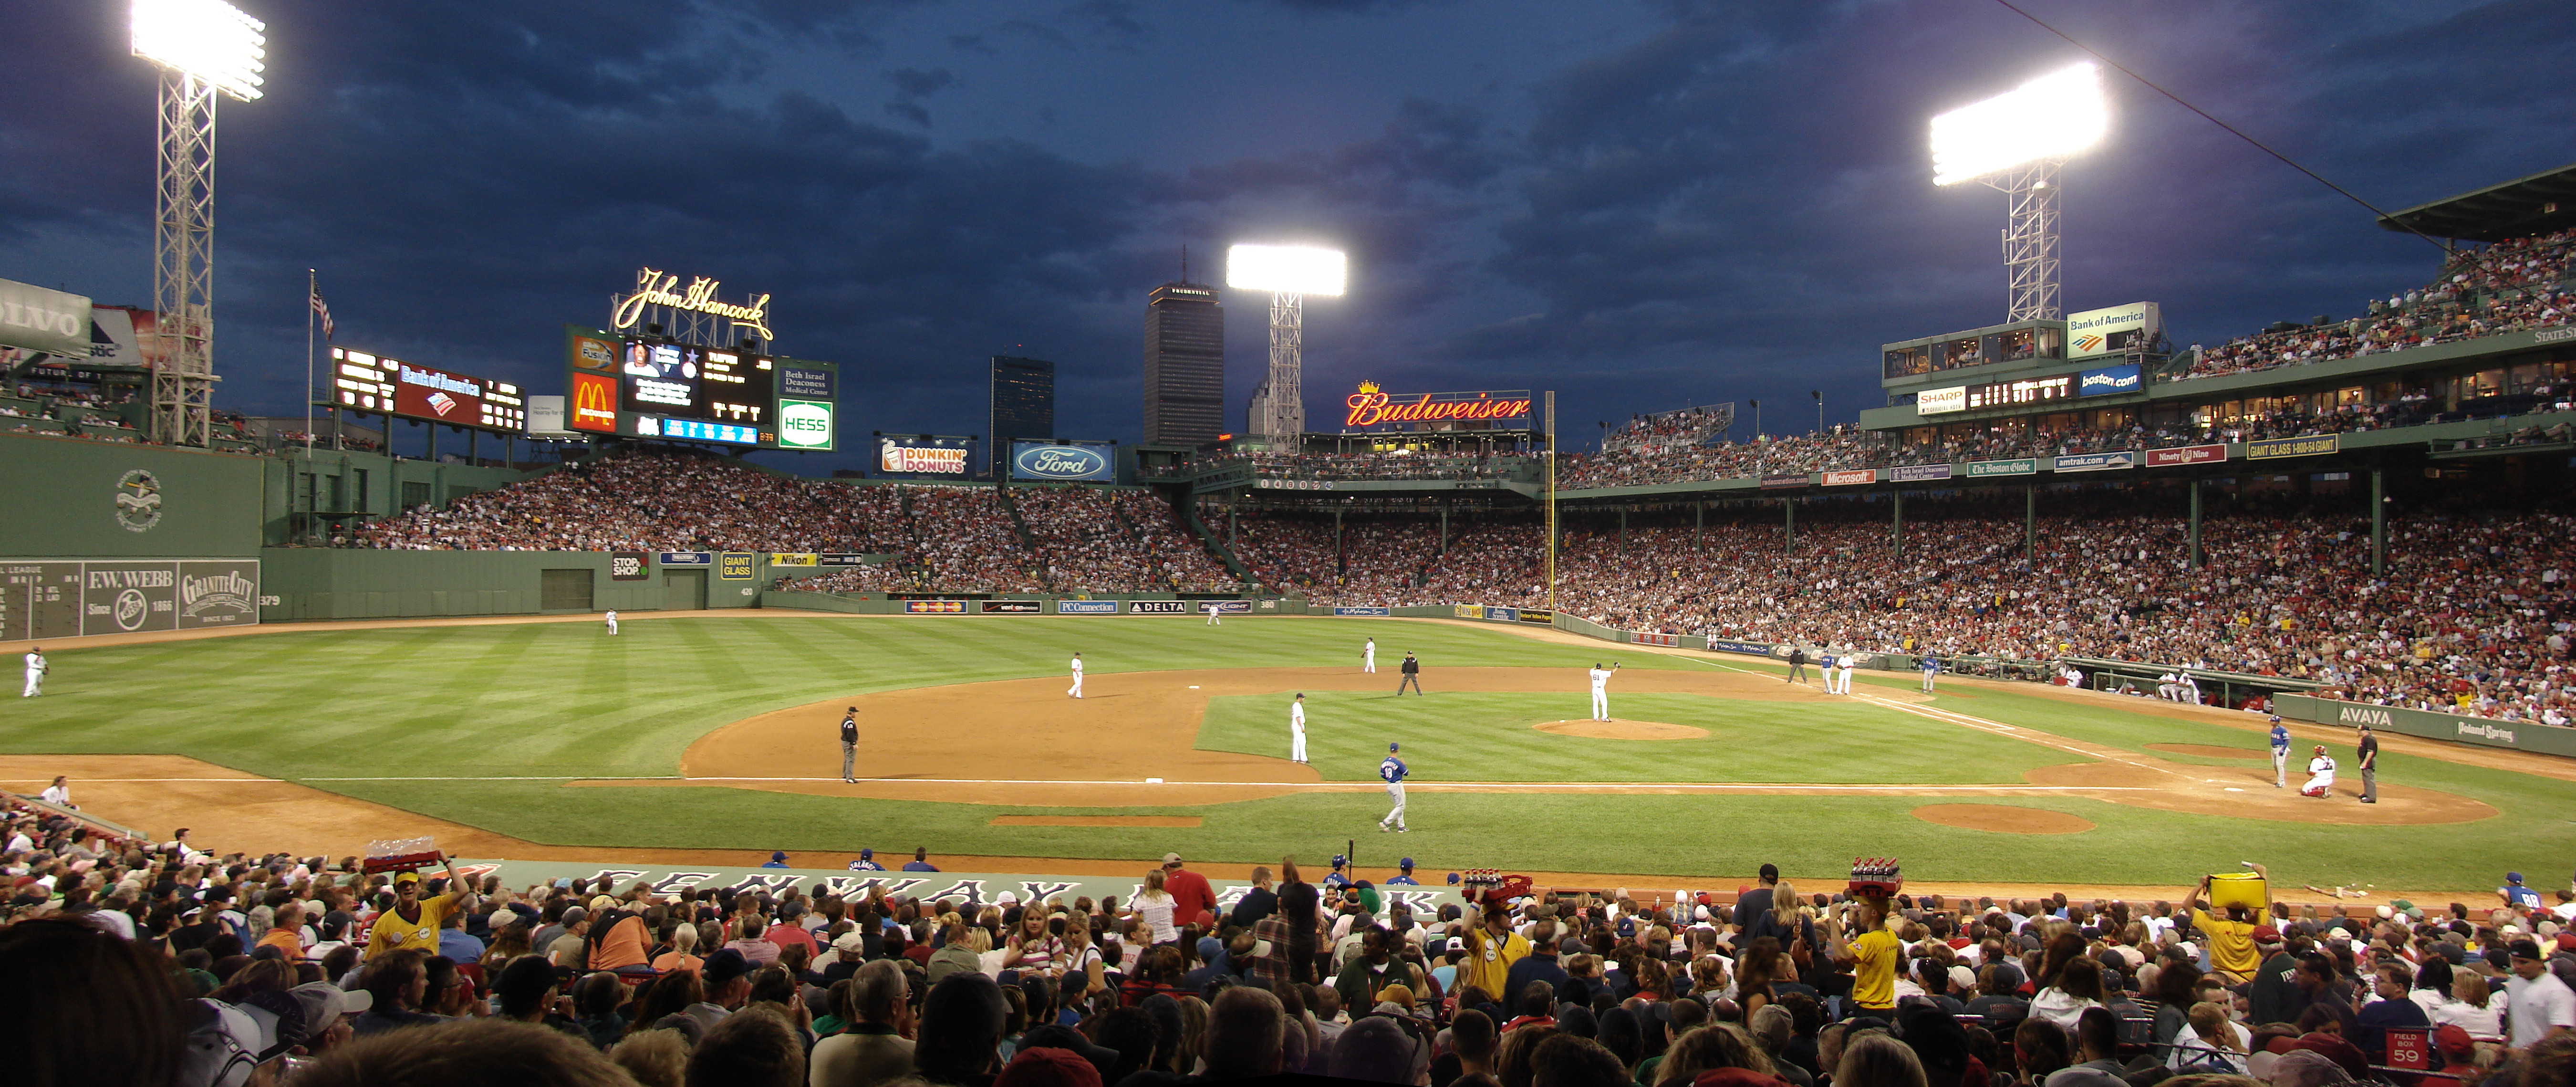 Fenway Park Home of Boston Red Sox Opened 110 Years Ago on April